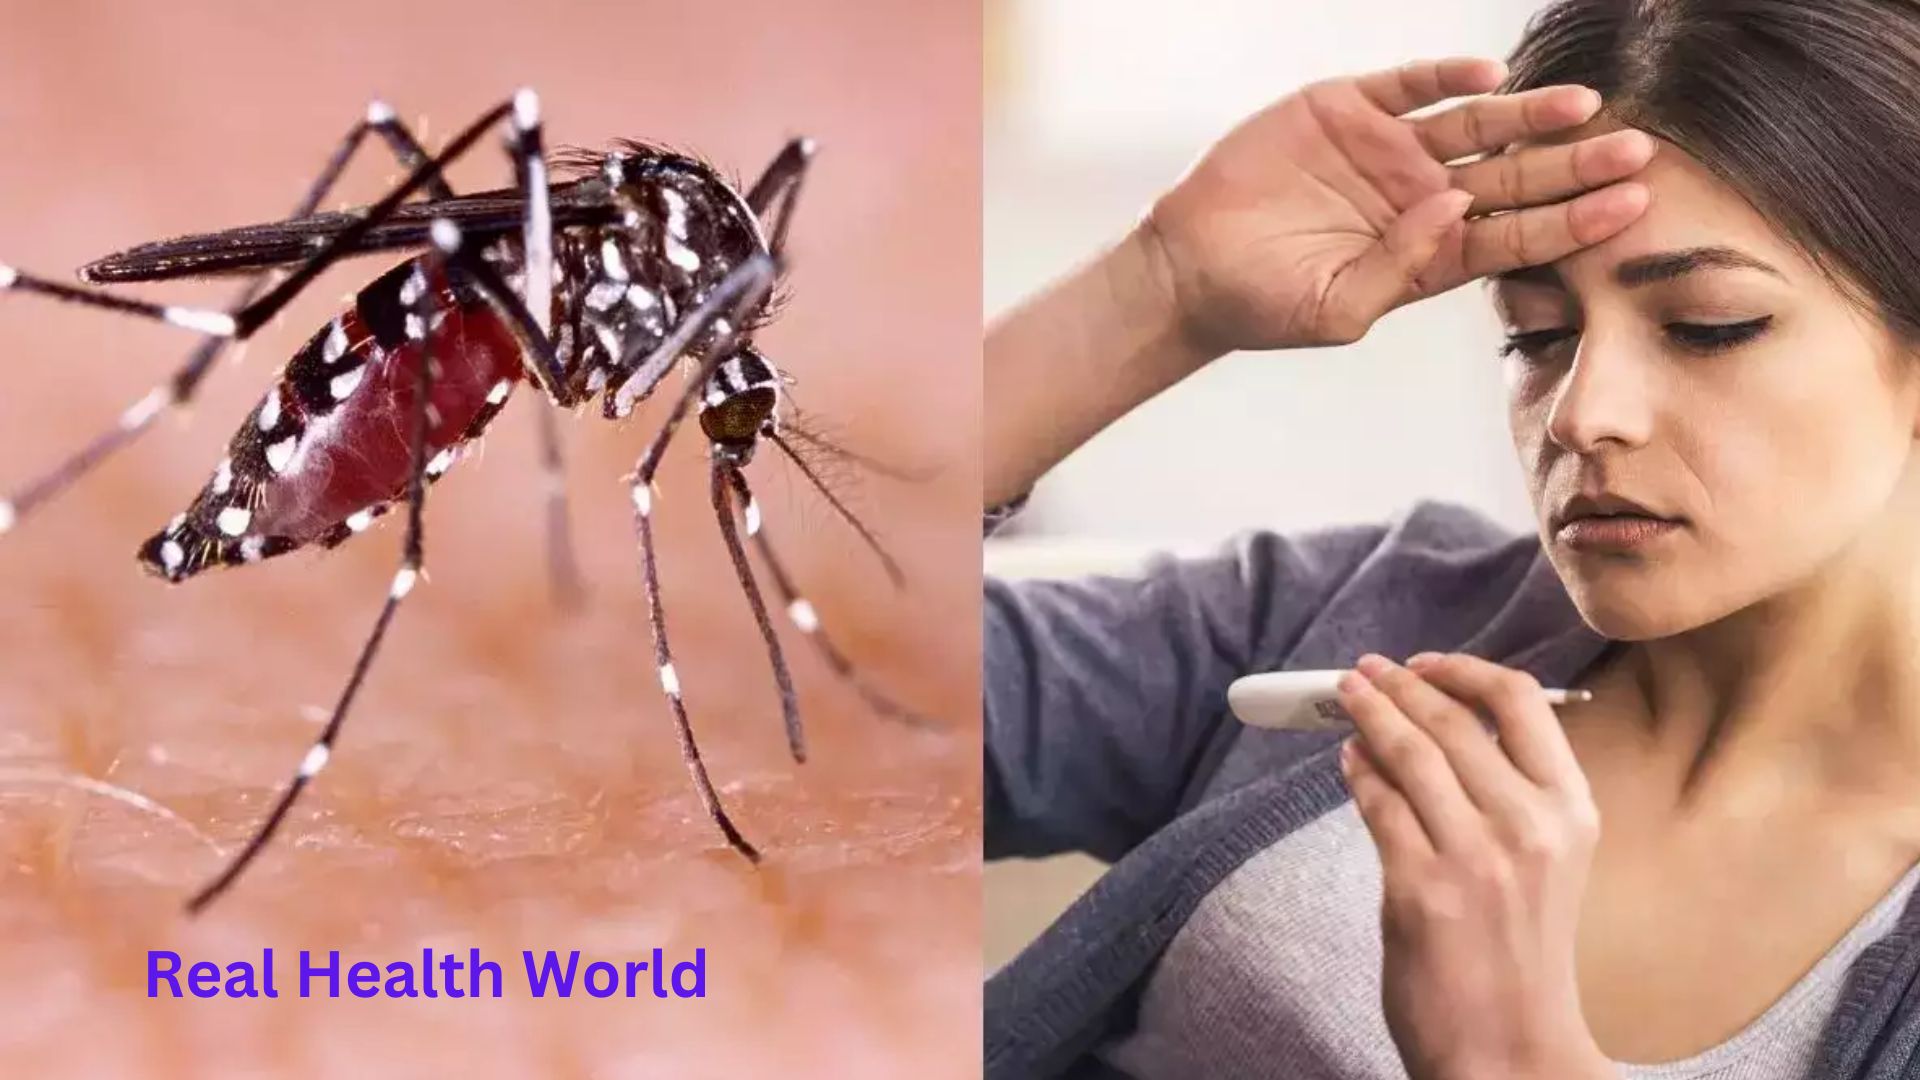 How to protect children from dengue fever